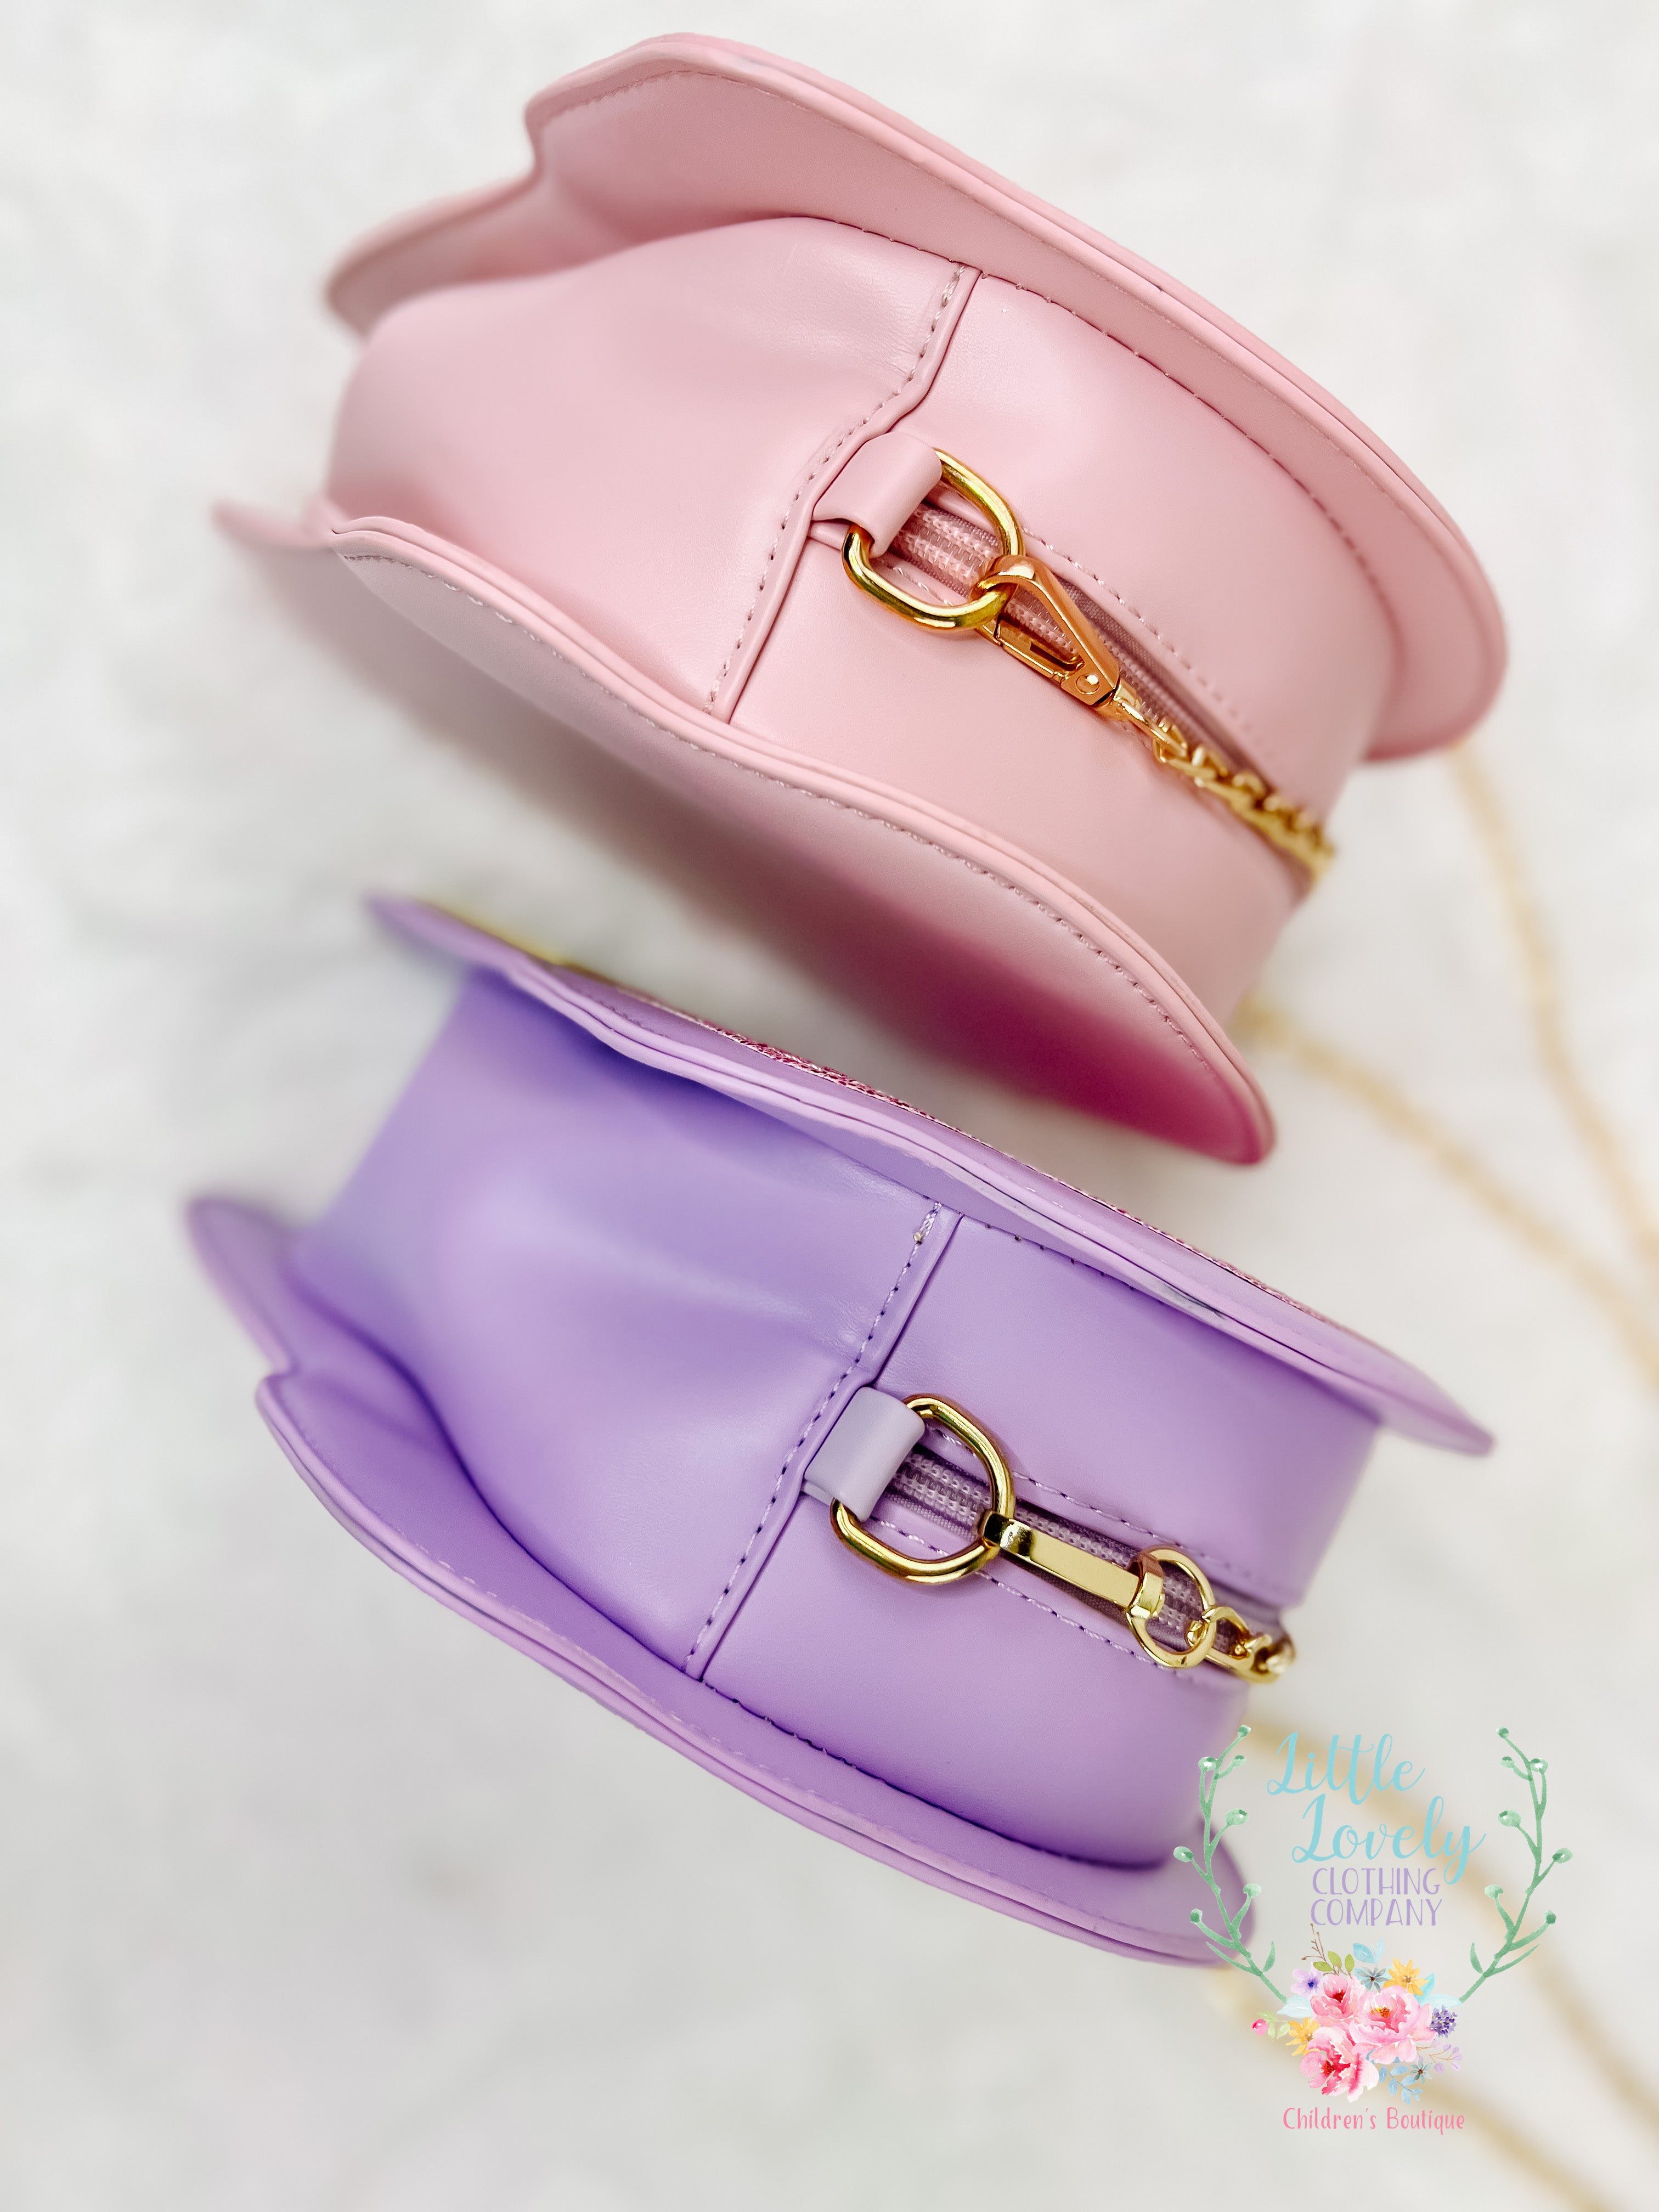 SHOP: New Disney Princess Ice Cream Cone Purses from Loungefly Are the  Perfect Treat for Summer - WDW News Today